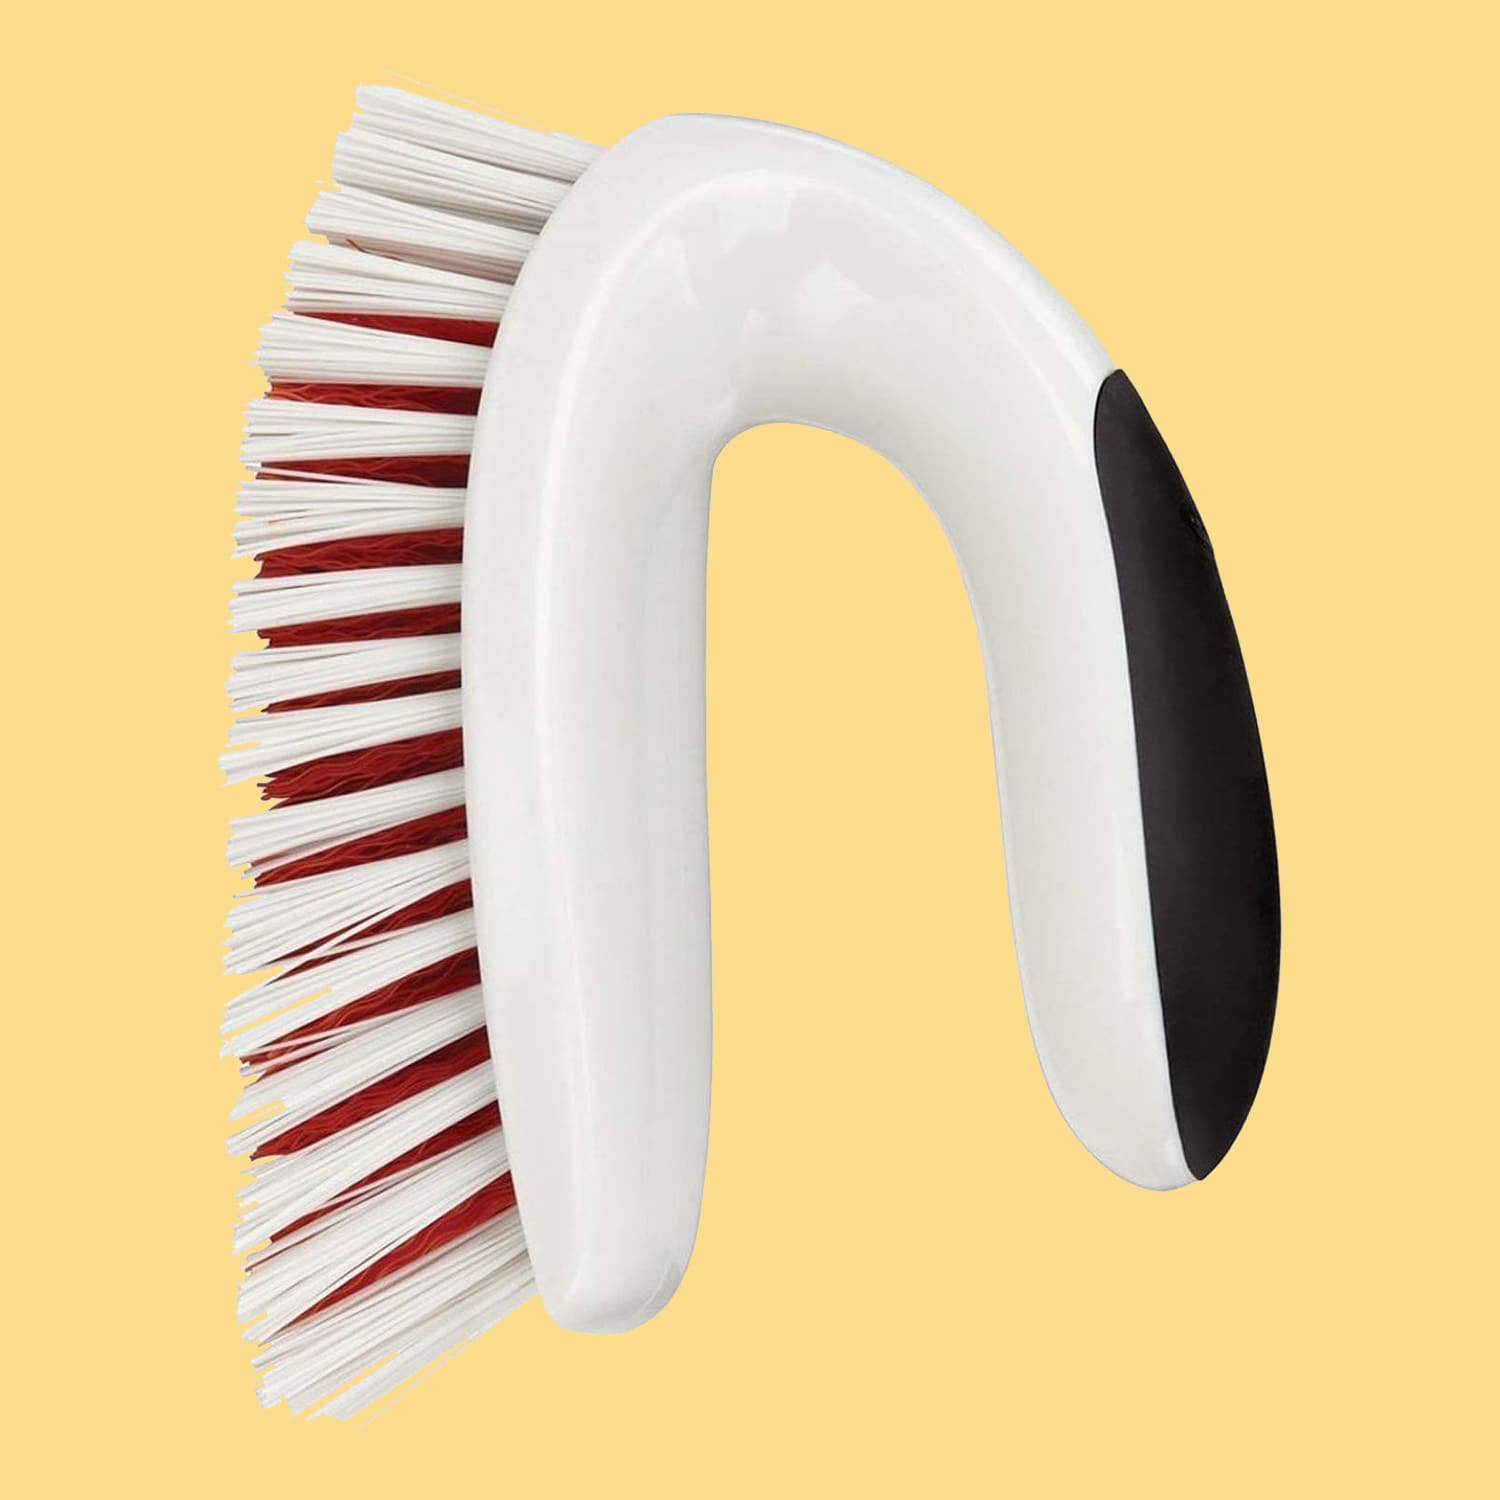 http://cdn.apartmenttherapy.info/image/upload/v1580163332/gen-workflow/product-listing/oxo-scrub-brush-y.jpg